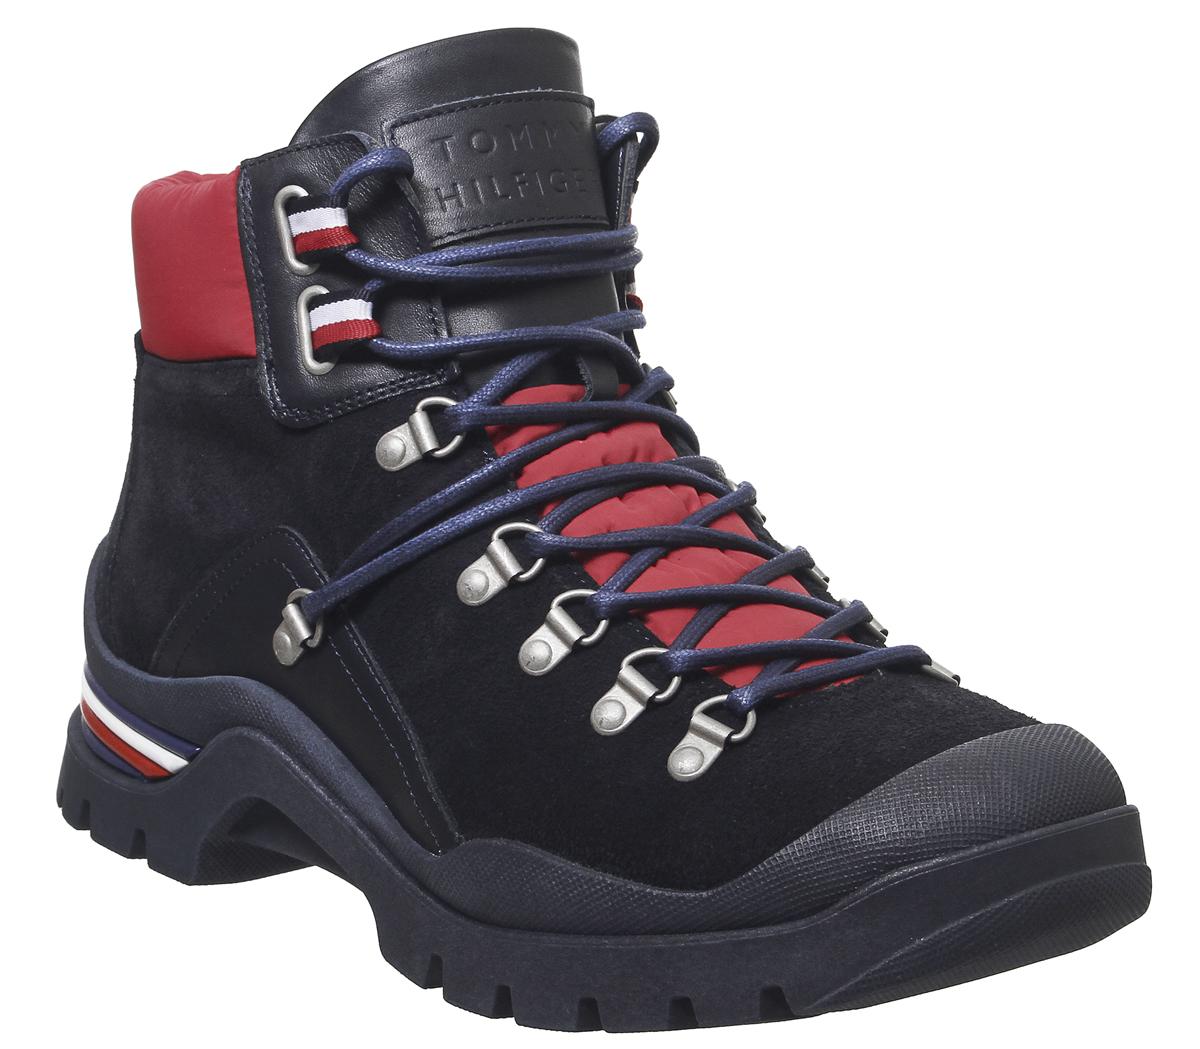 tommy hilfiger boots navy